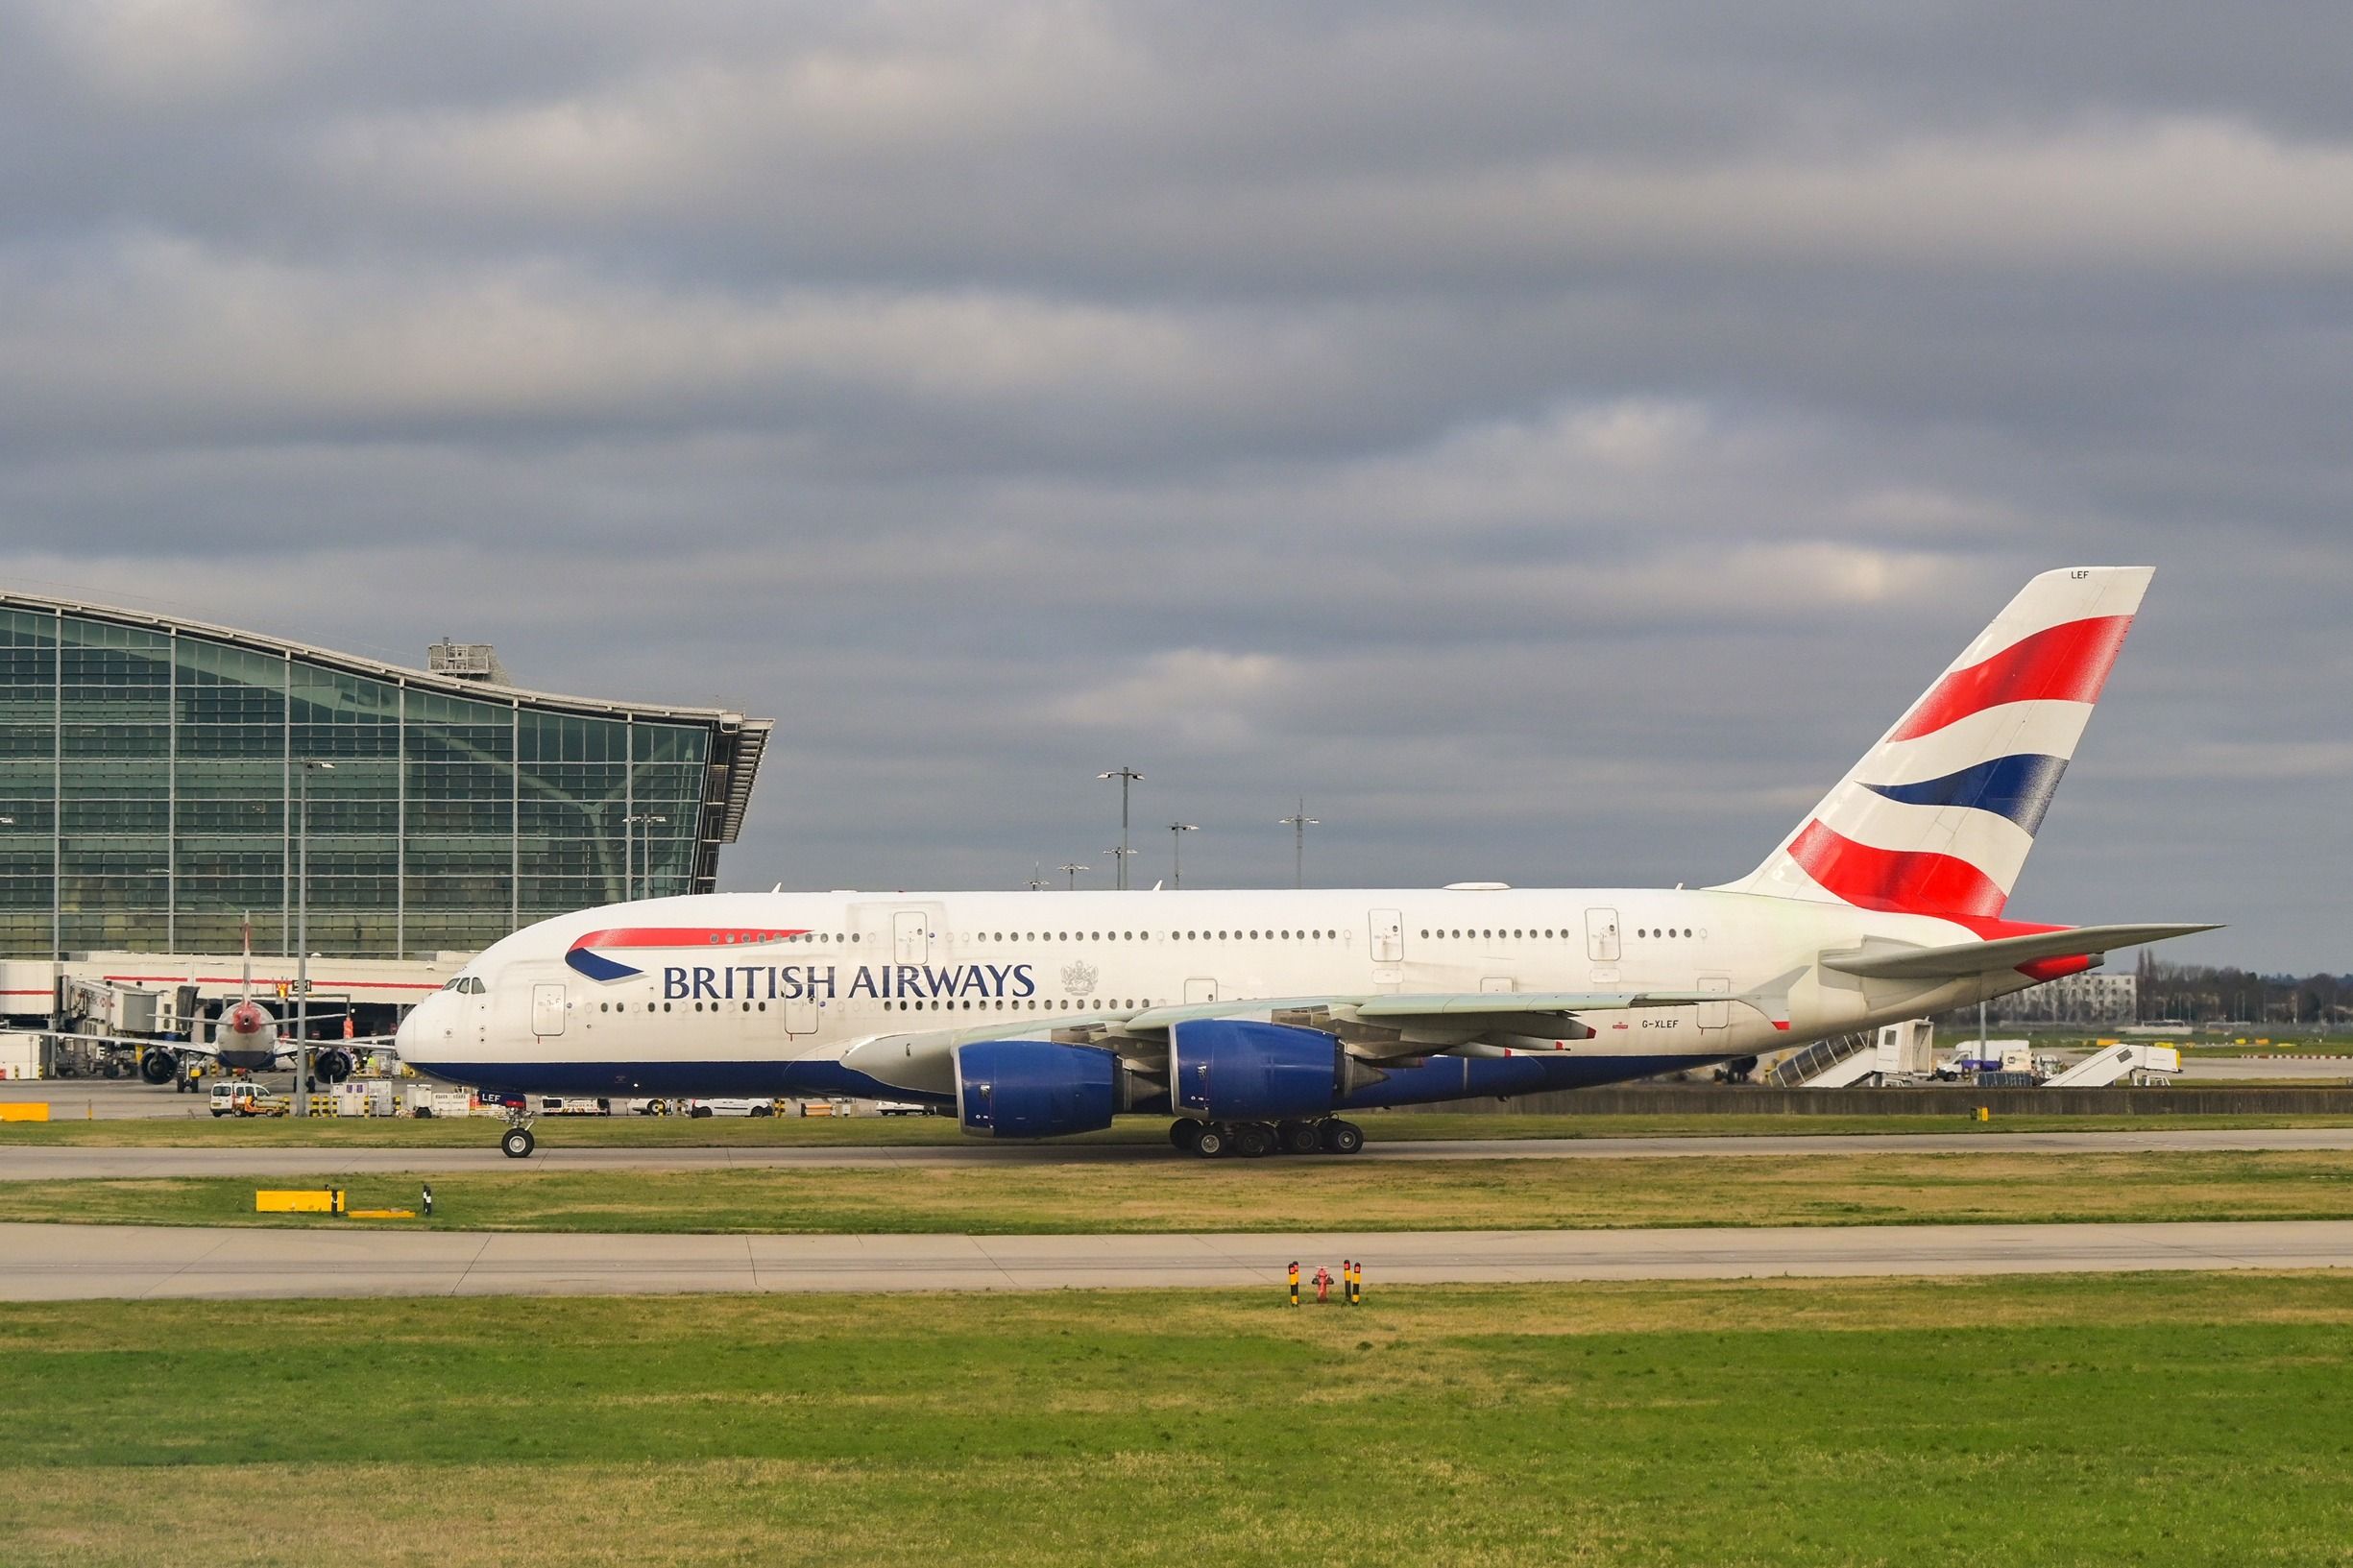 British Airways Airbus A380 taxiing shutterstock_2464888075